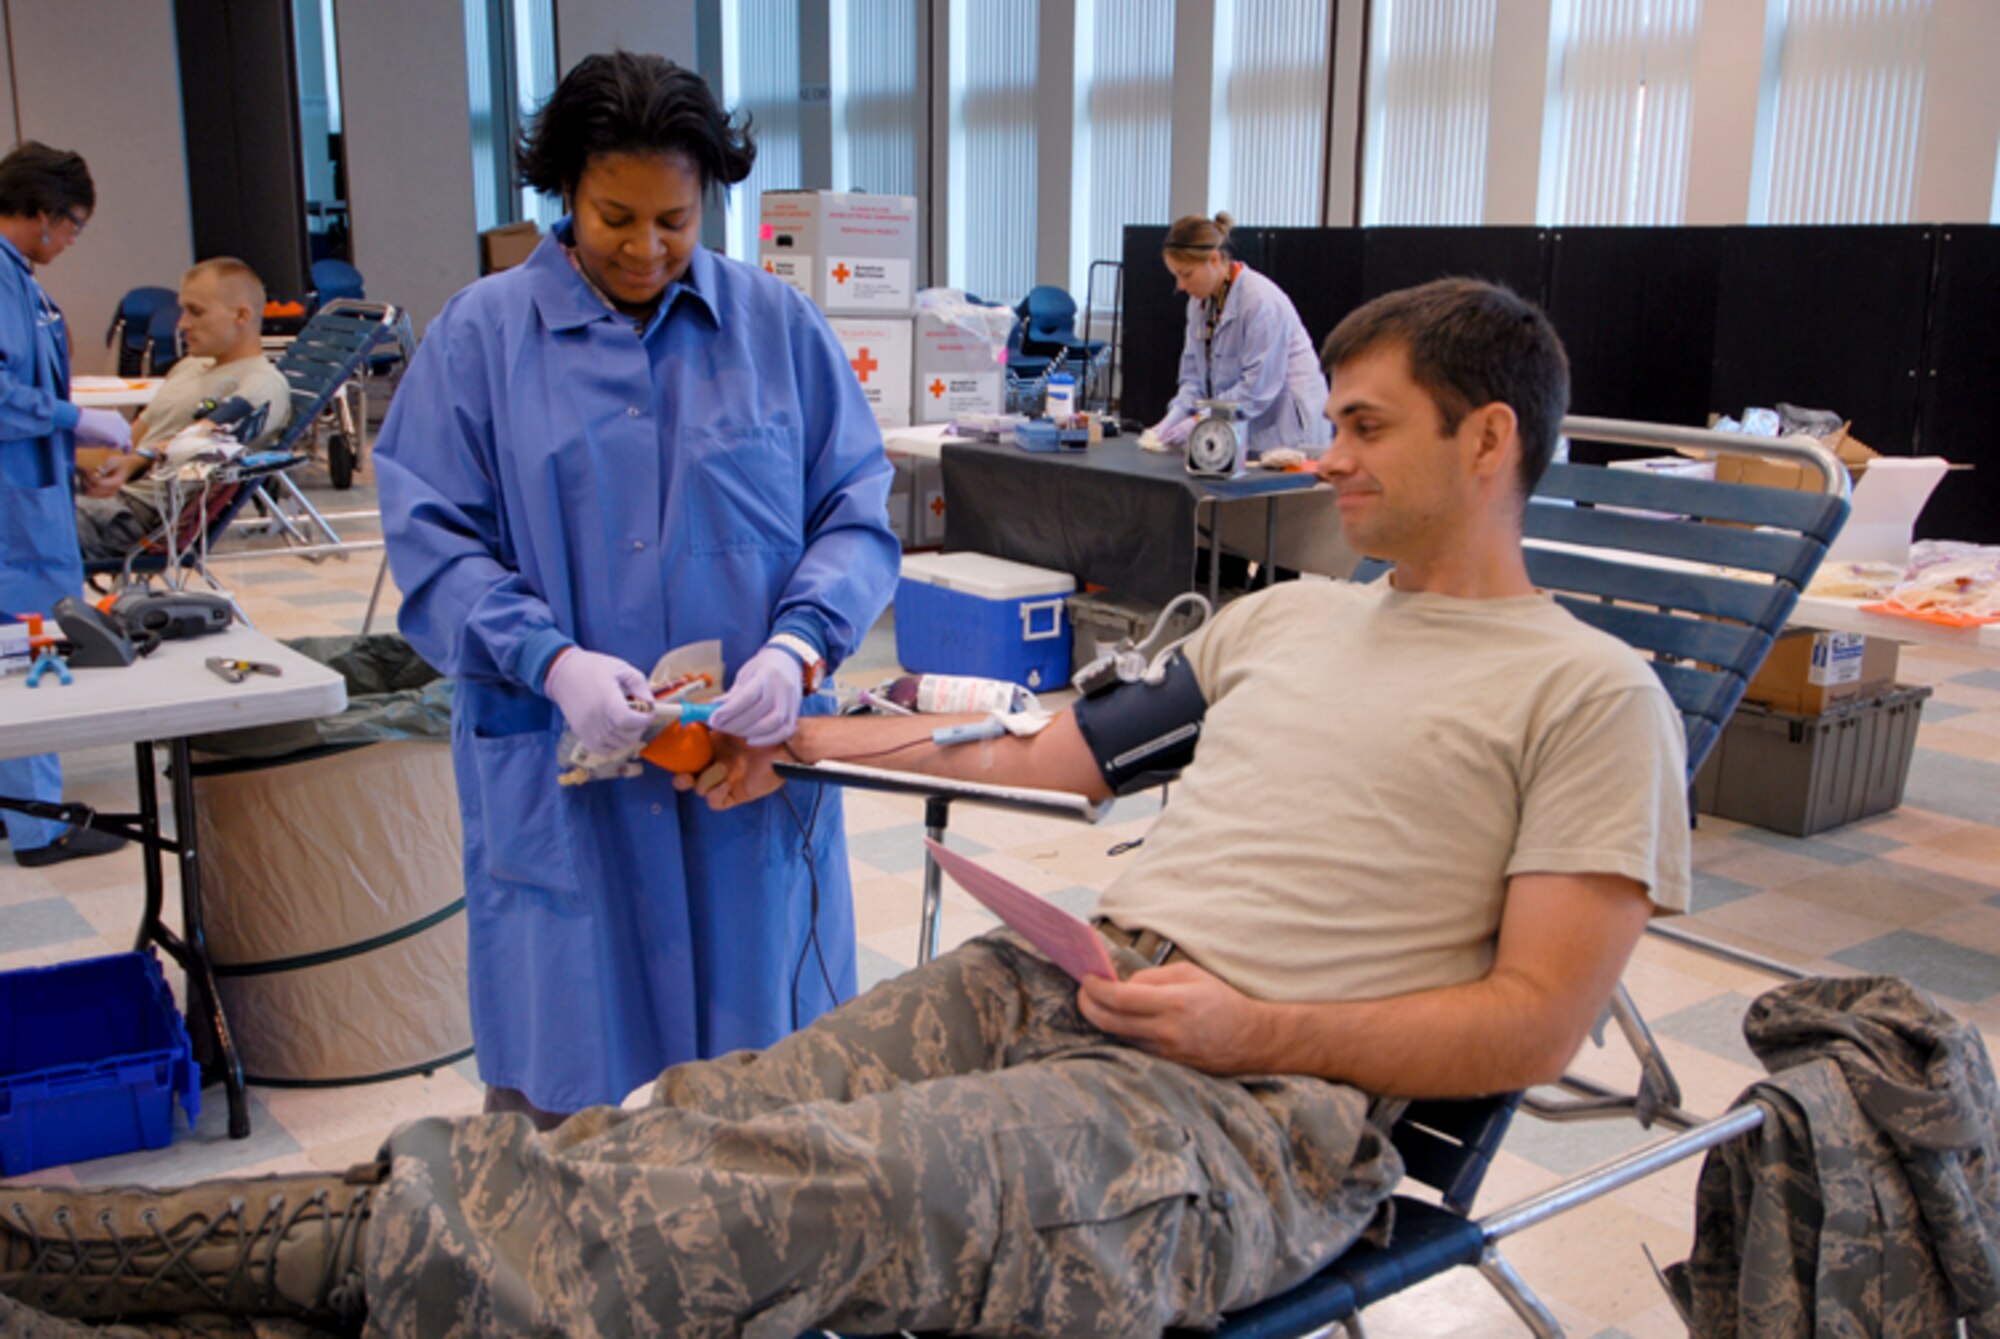 Staff Sgt. Nathan Goff, 180th Fighter Wing, donates blood at a Red Cross blood drive hosted at the 180th Fighter Wing, September 8. The 180th FW has been hosting blood drives for unit members since 2004. Throughout that time, 180th members have donated 438 units of blood. (U.S. Air Force Photo by Master Sgt. Beth Holliker/Released).